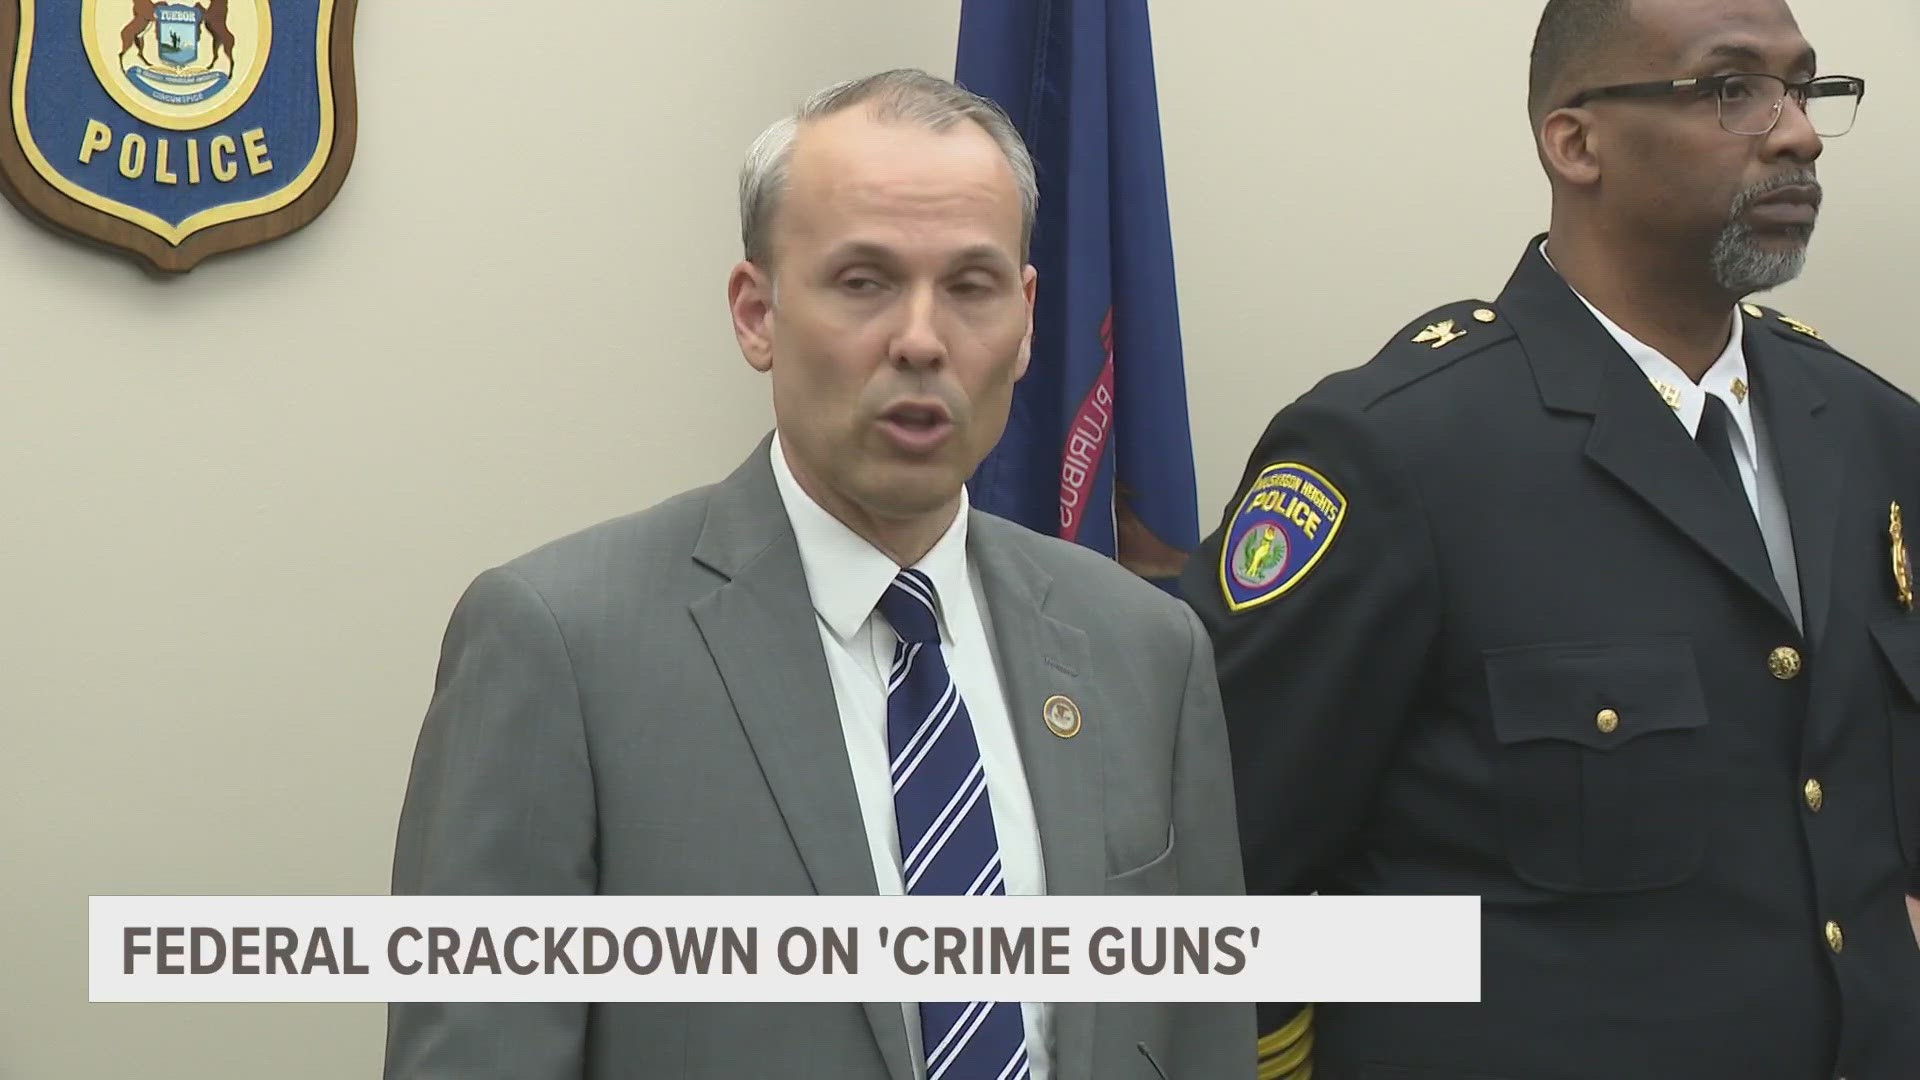 Safe Summer Initiative is a federal crackdown on 'crime guns'